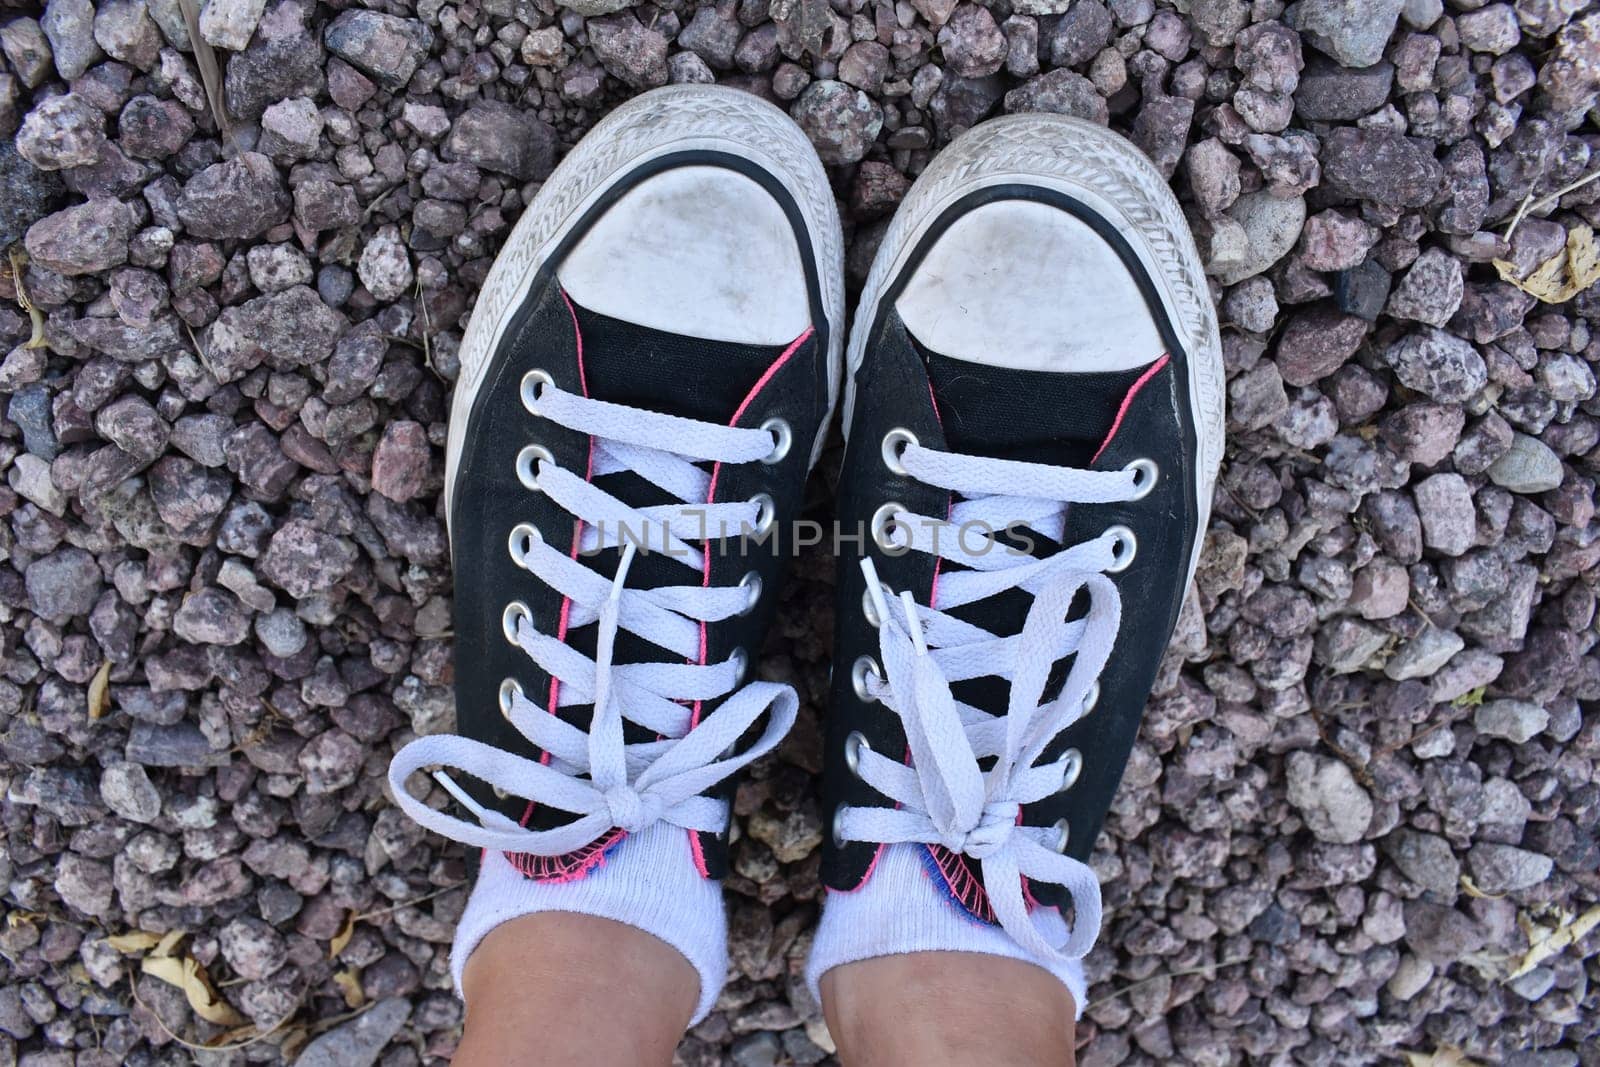 Black and White Sneakers on Rocky Ground . High quality photo